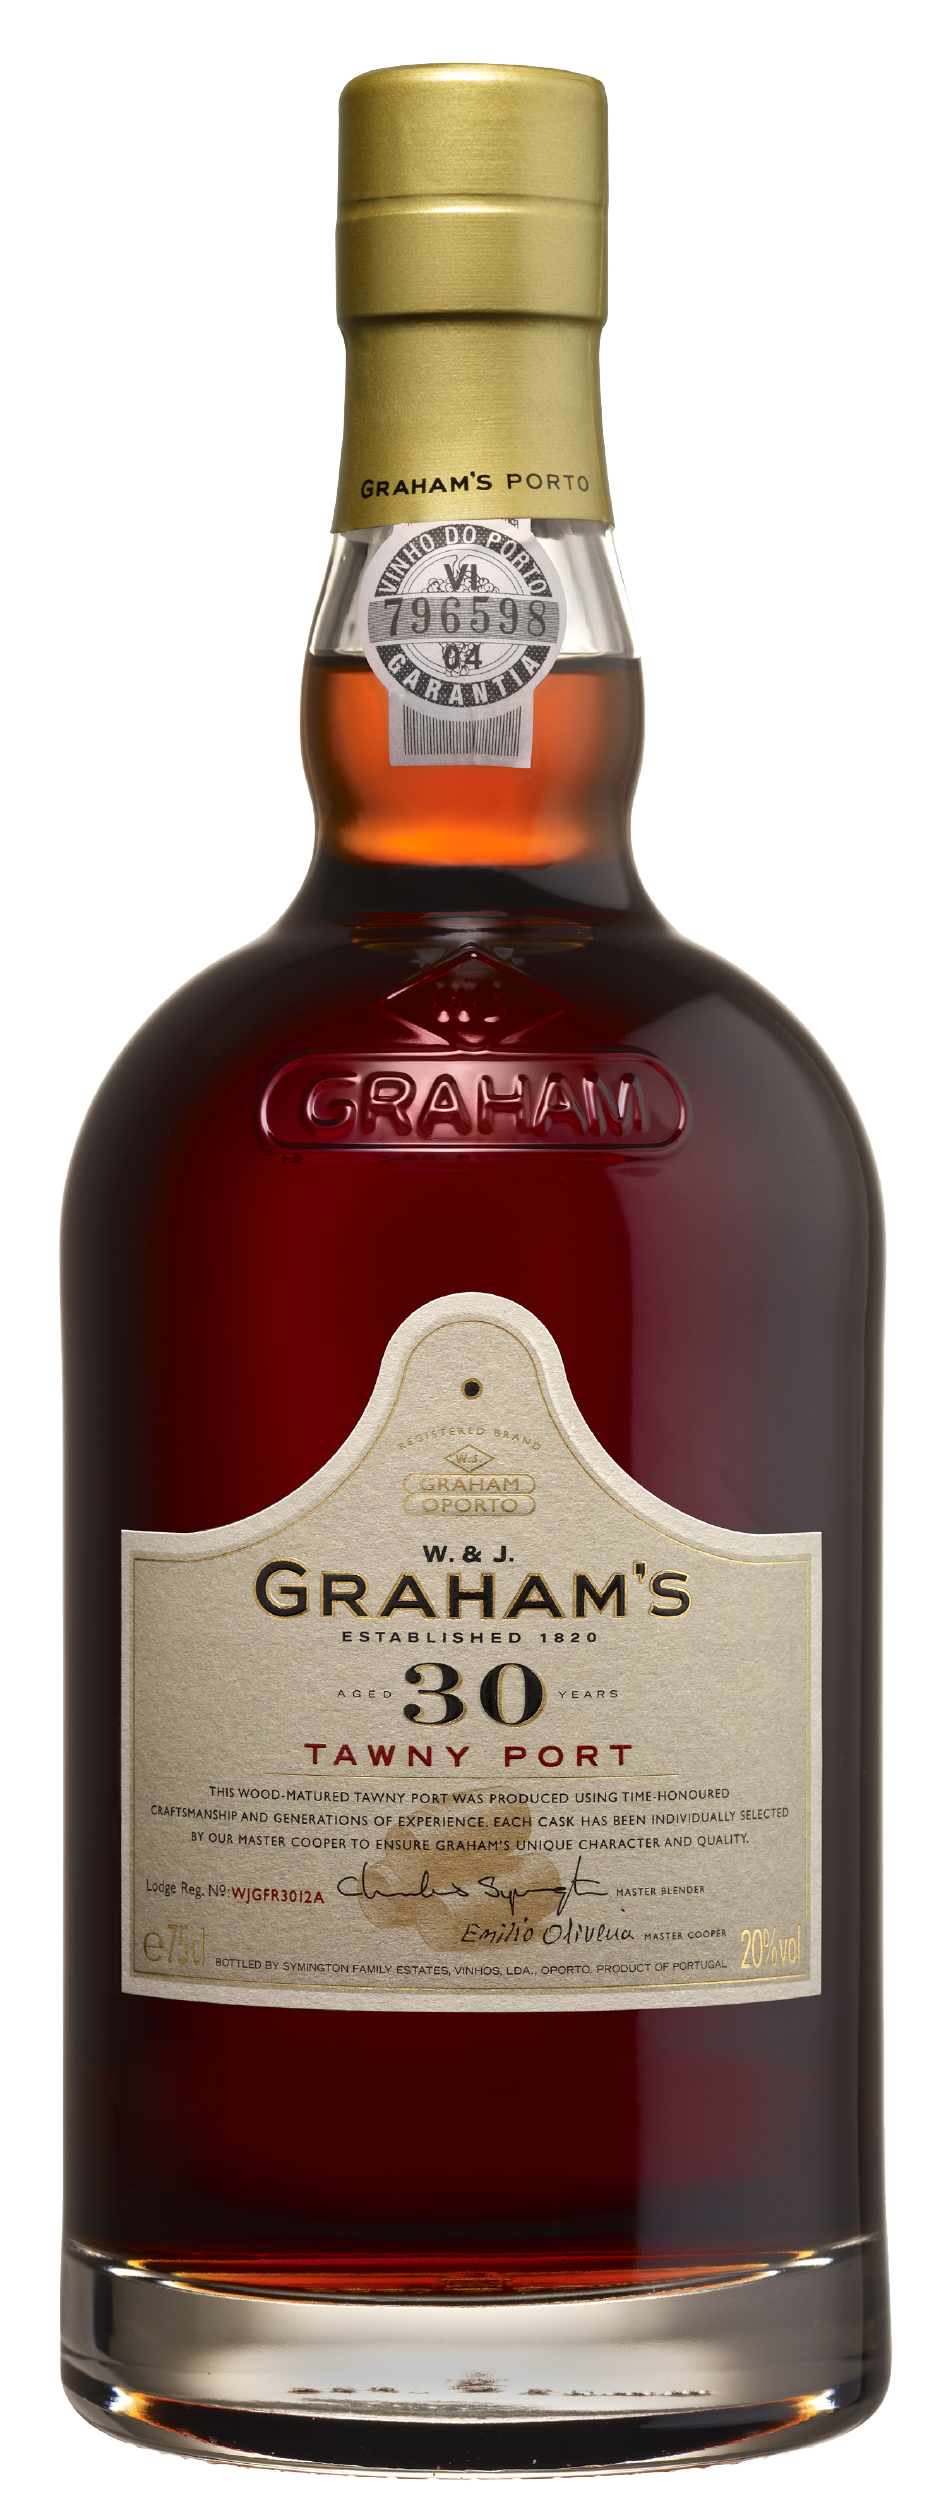 Product Image for GRAHAM'S 30 YEAR OLD TAWNY PORT 